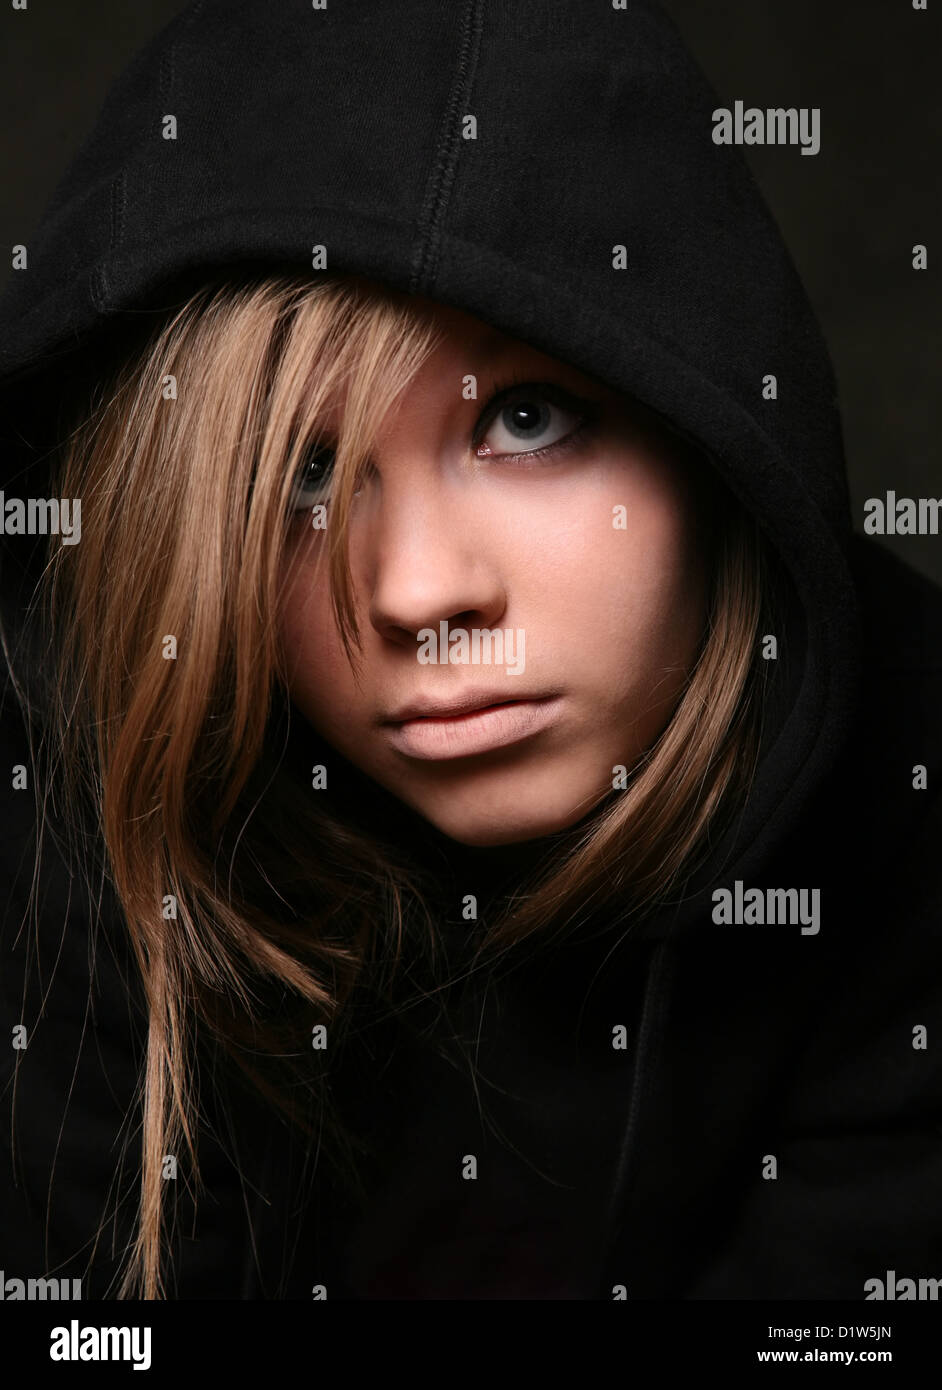 Portrait of the young girl in a black hood Stock Photo - Alamy